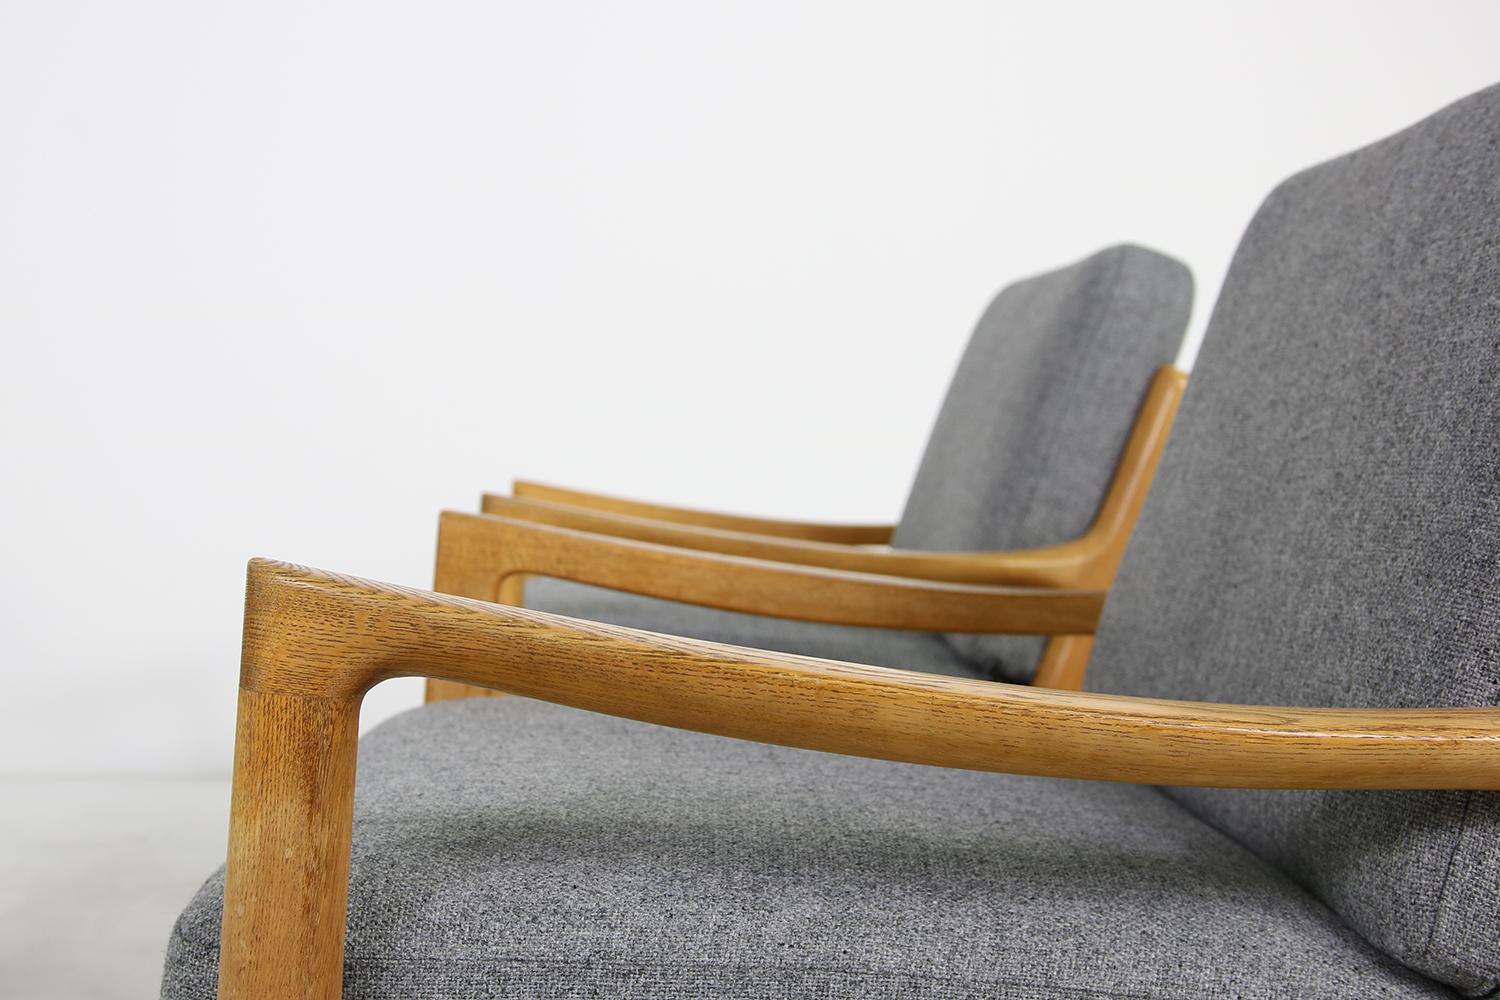 Mid-20th Century 1960s Oak Living Room Set Sofa & Two Lounge Chairs Ole Wanscher, Danish Modern For Sale